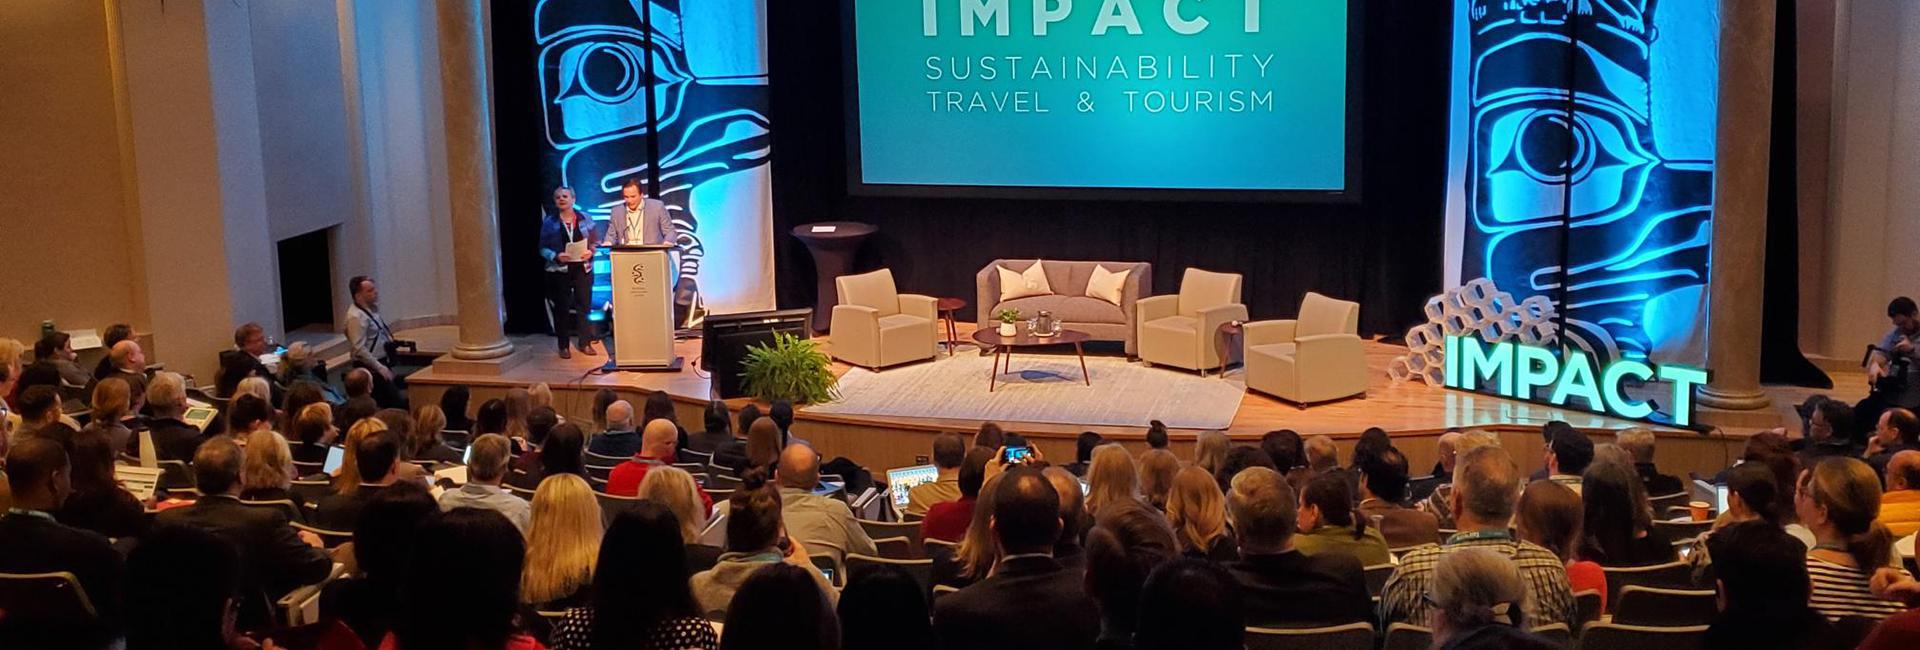 Impact Sustainability Travel & Tourism at VCC